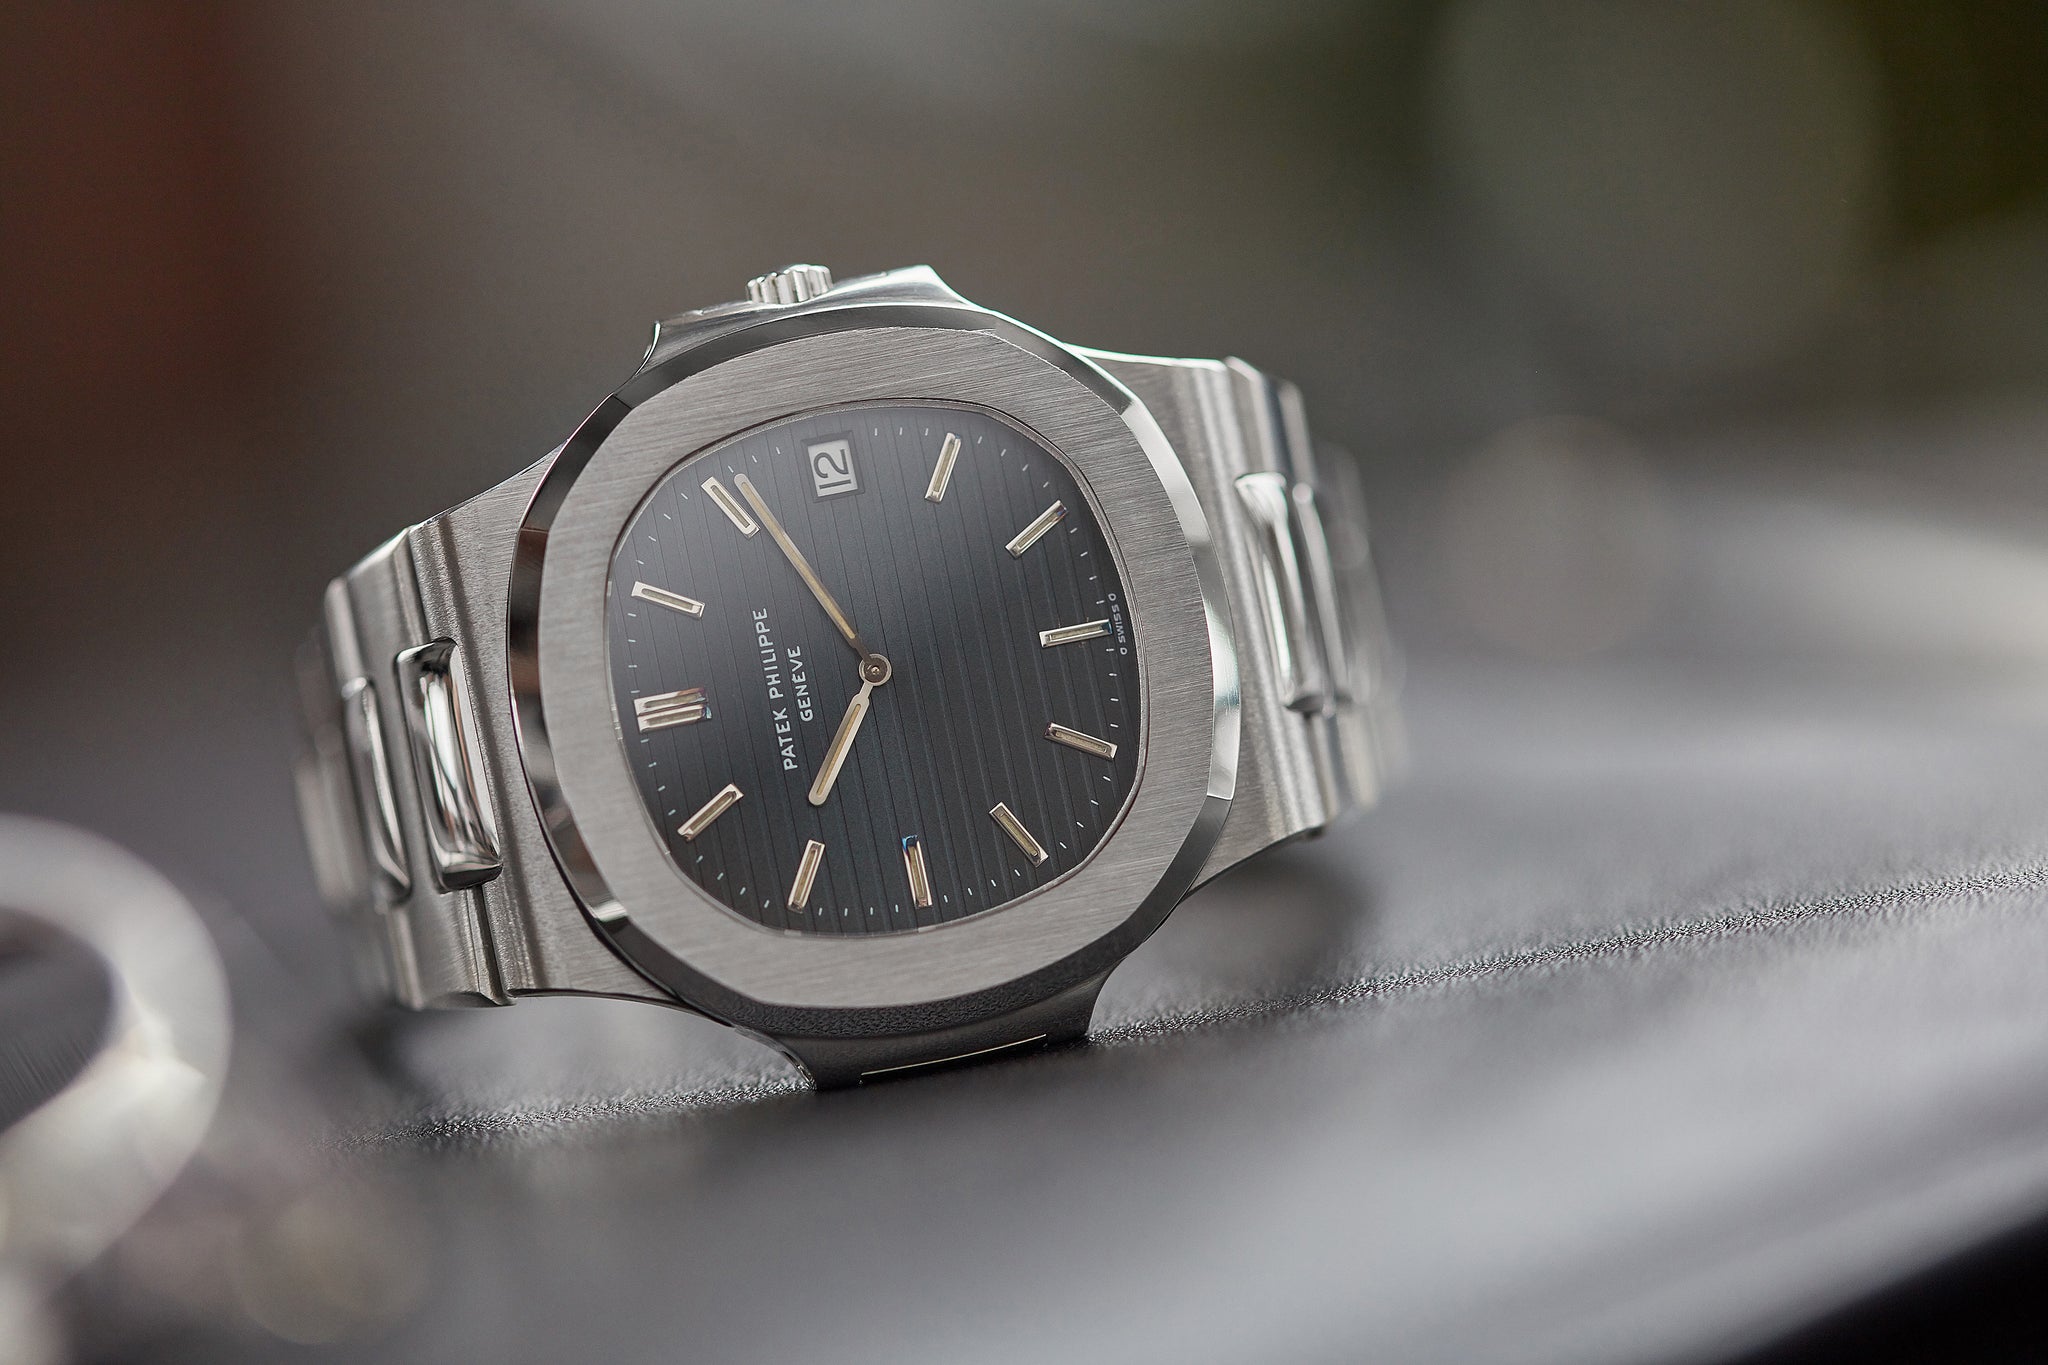 rare Patek Philippe Nautilus 3700-001A full set vintage watch for sale online at A Collected Man London UK specialist of rare watches